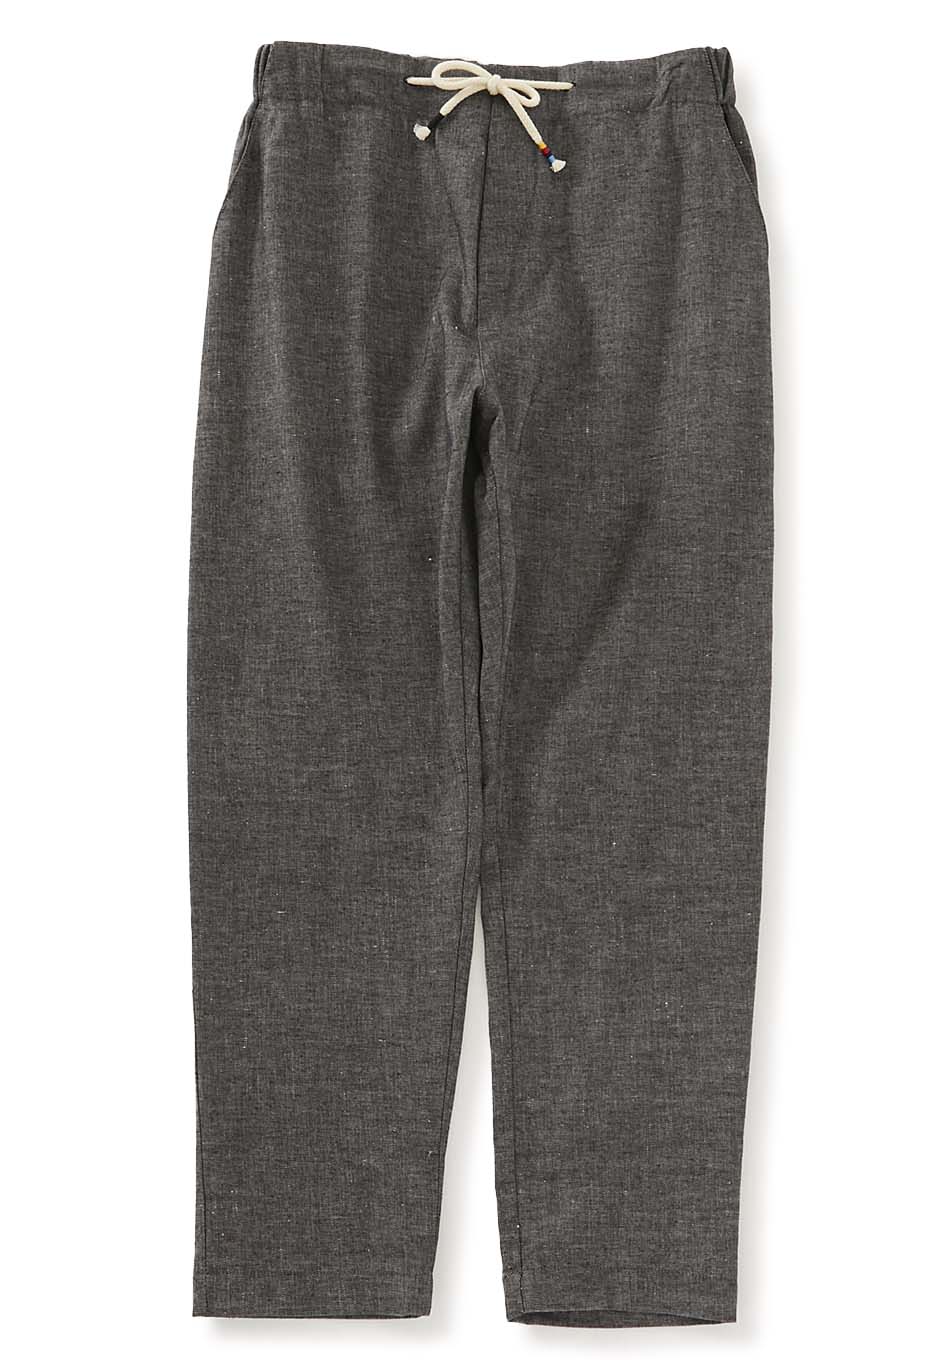 THE SILTED COMPANY Coffin Venezuelan Pants